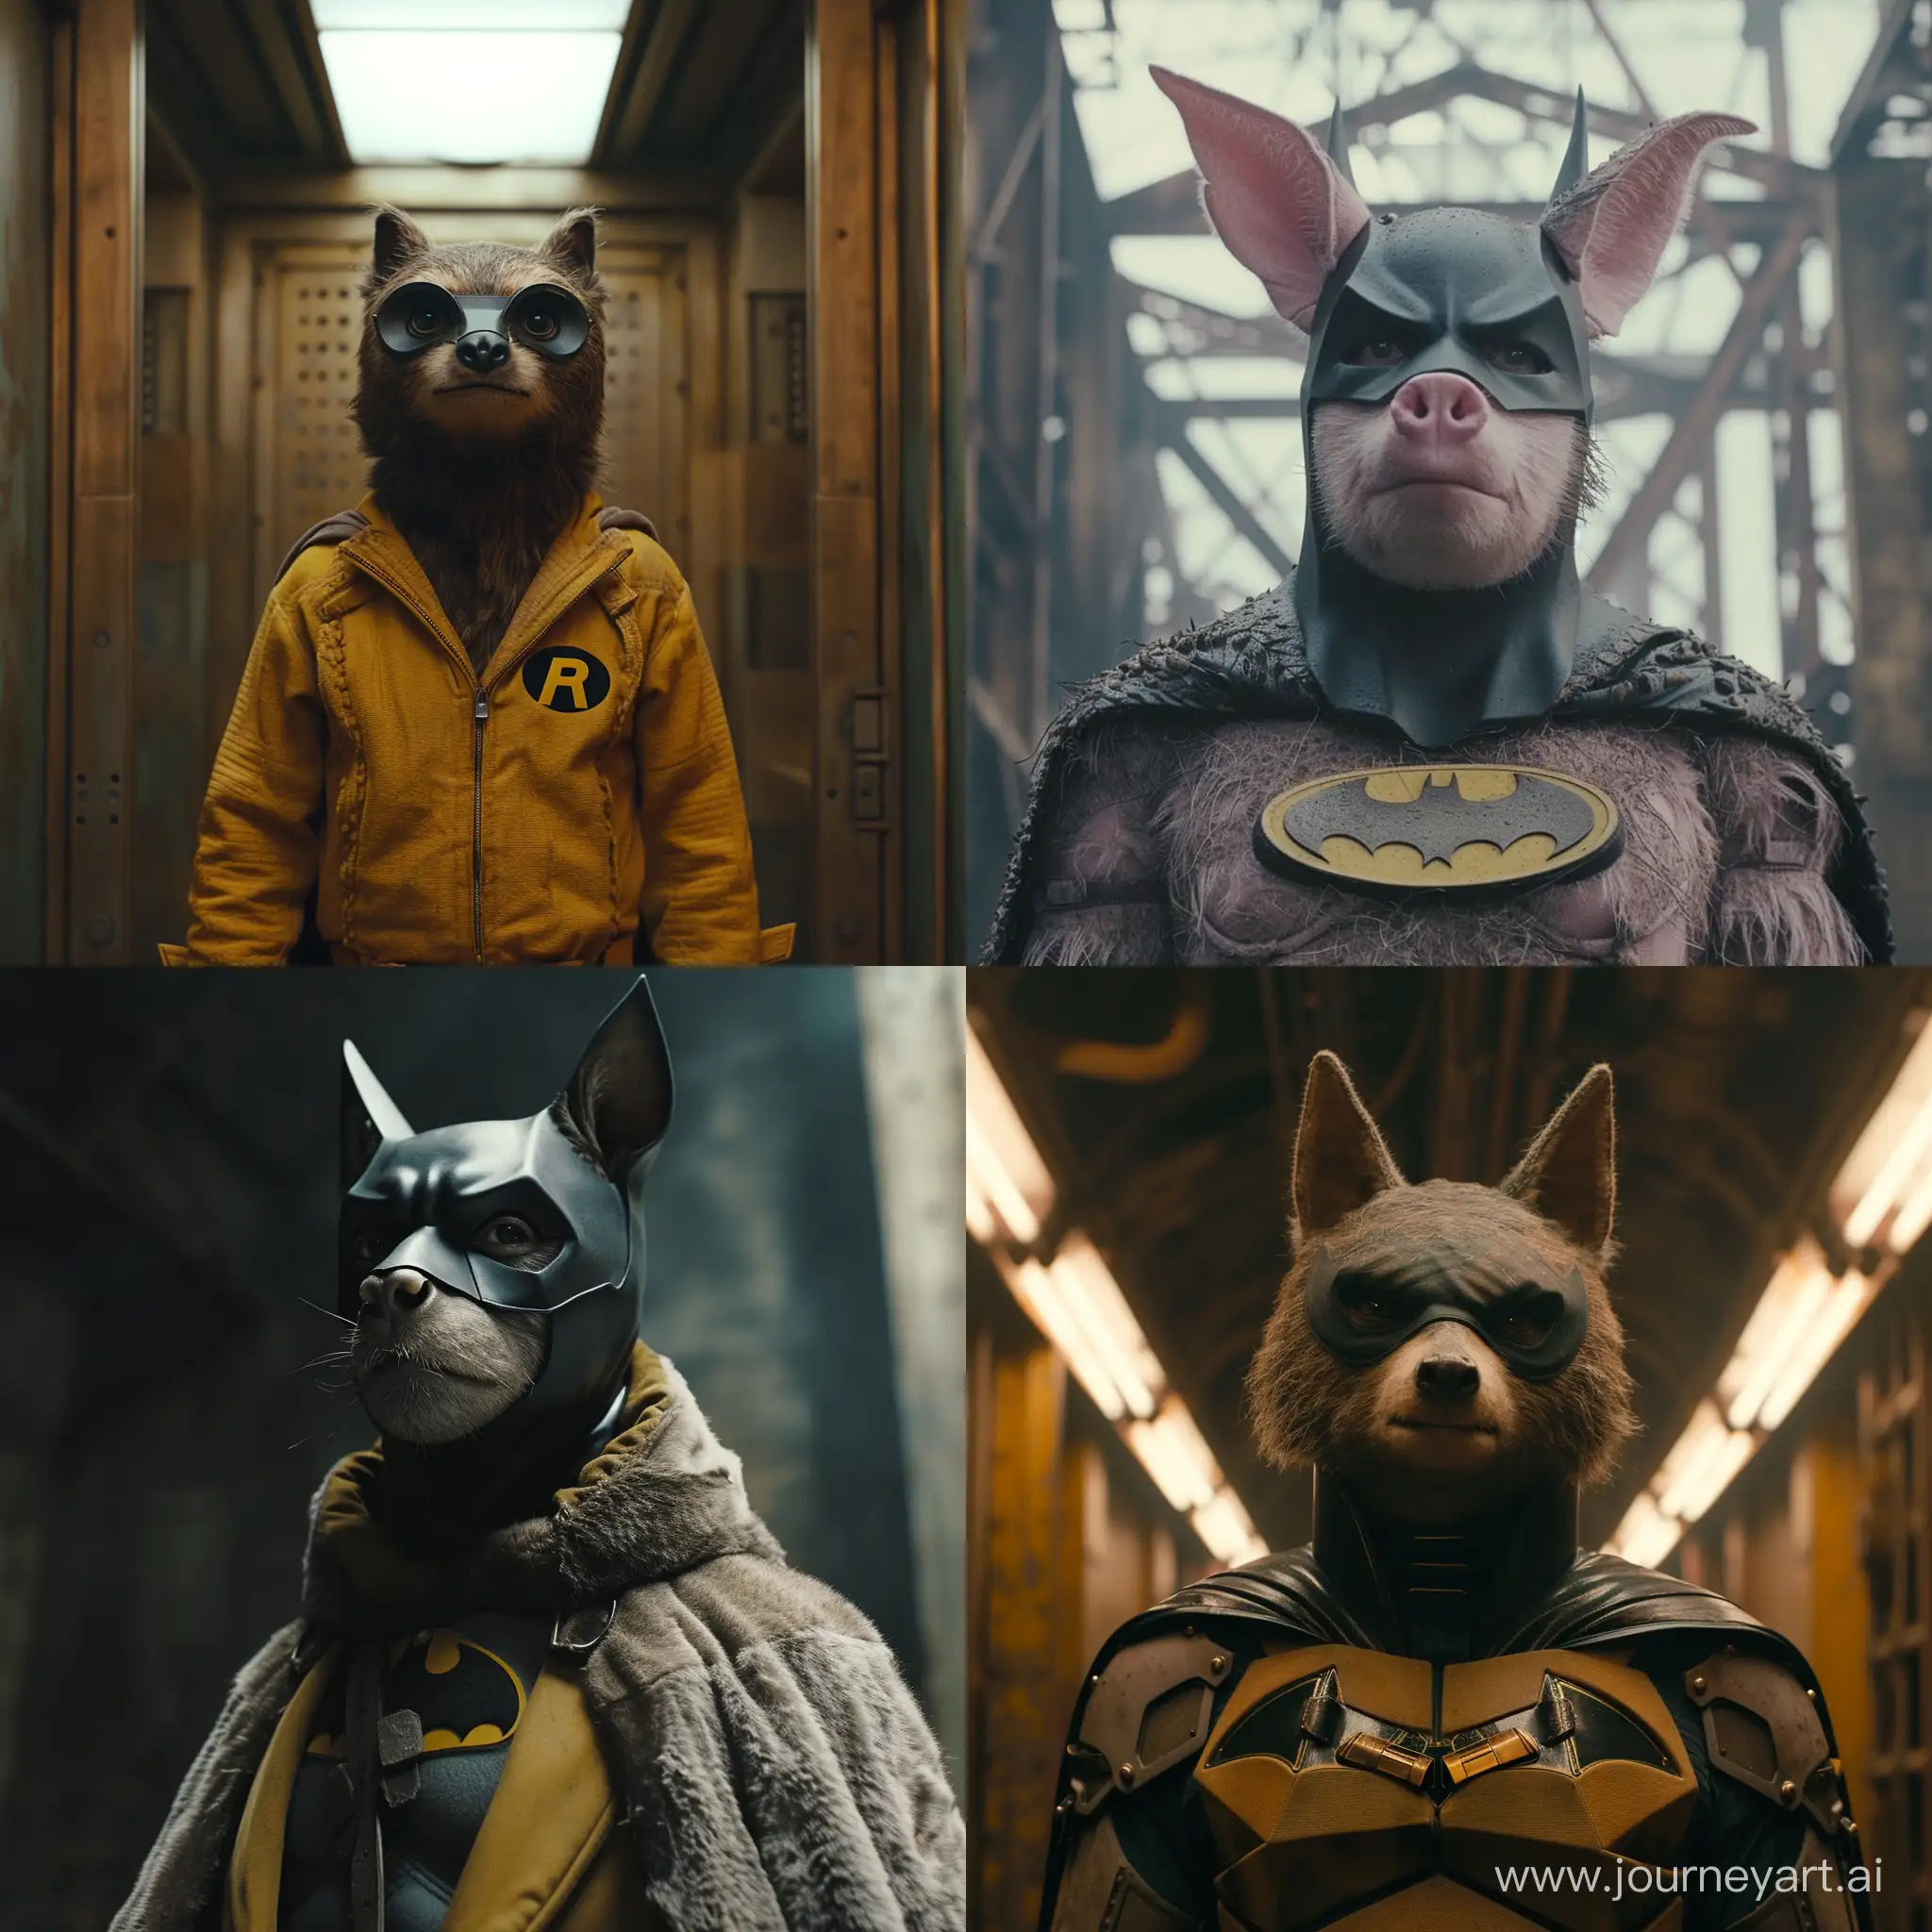 dvd screengrab from animal film, animal batman  from animal universe in animal era wearing animal costume, directed by west Anderson